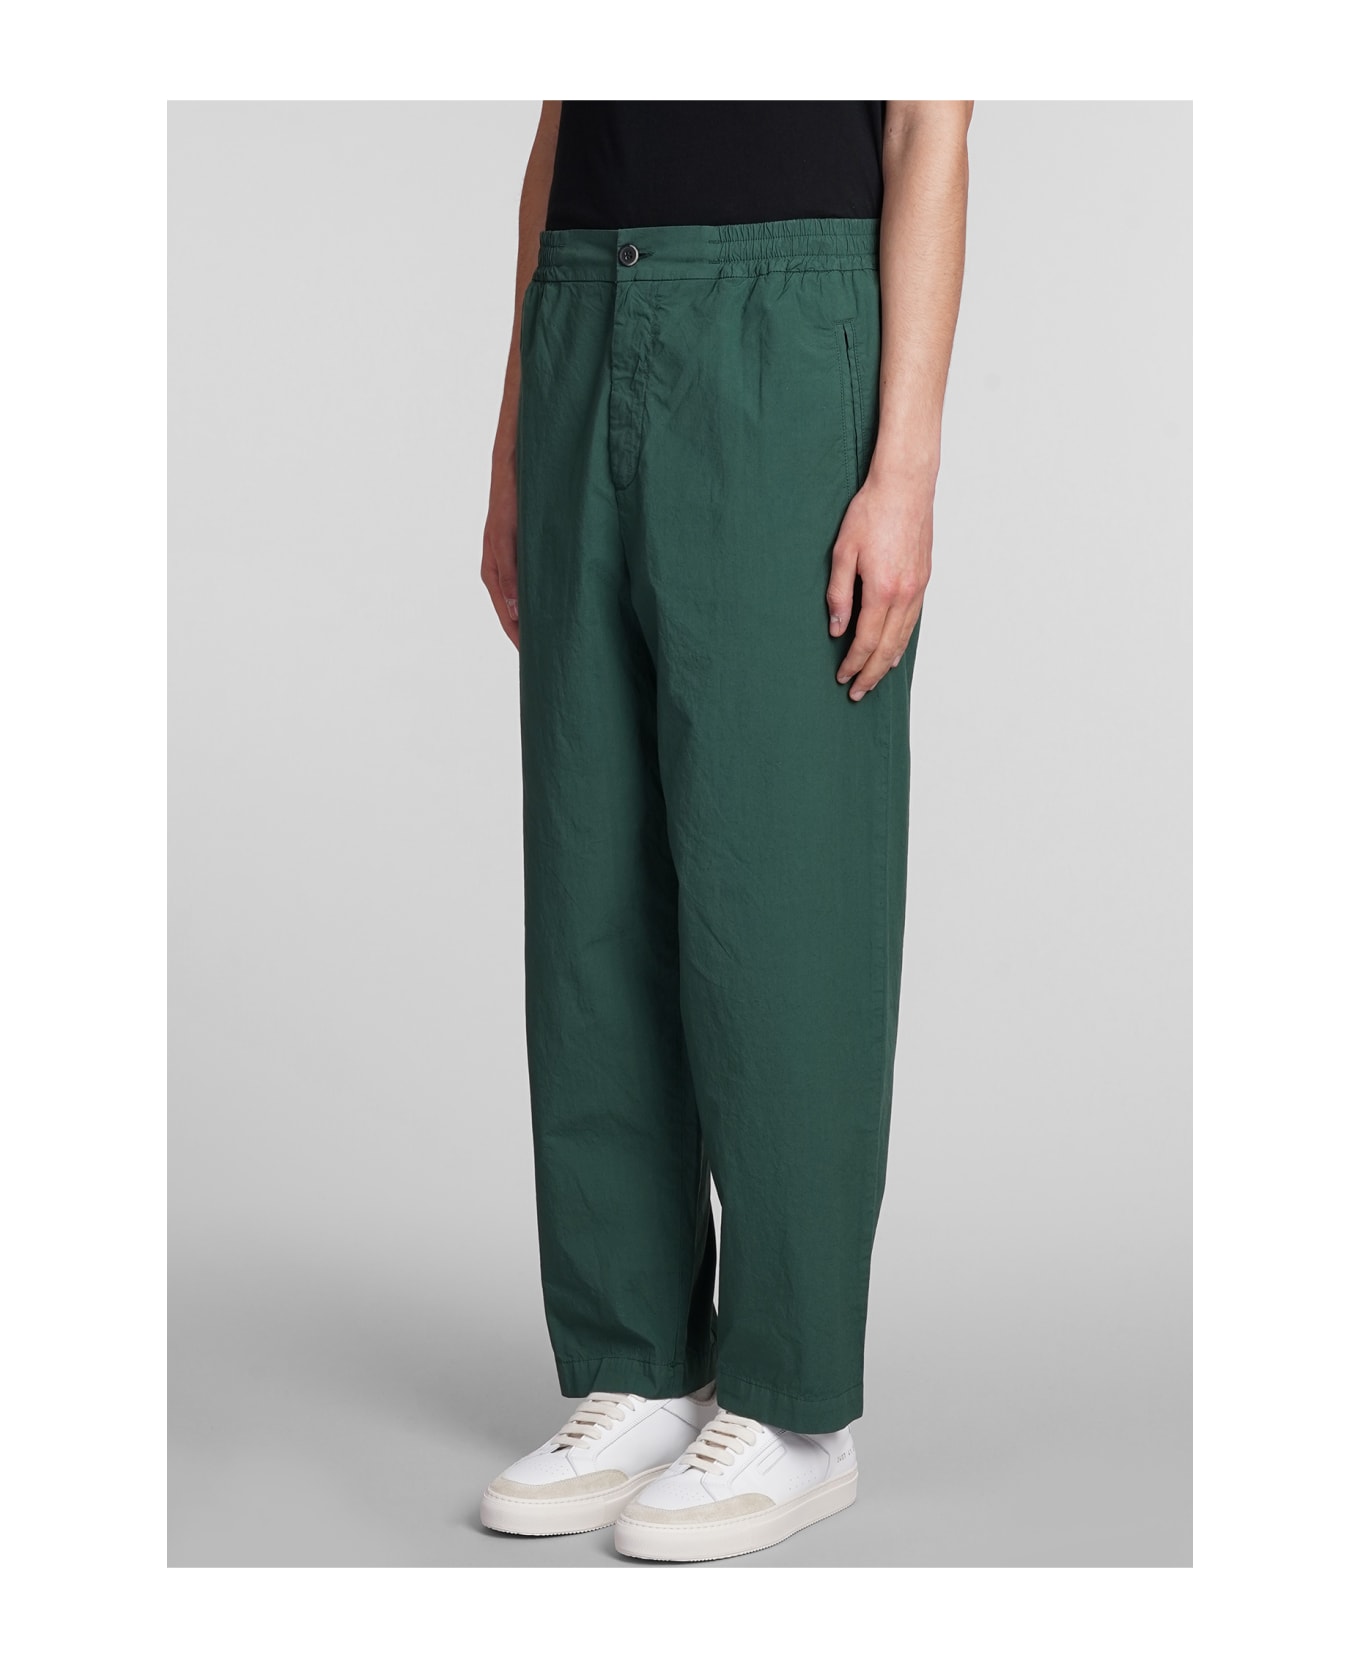 Barena Ameo Pants In Green Cotton - green ボトムス